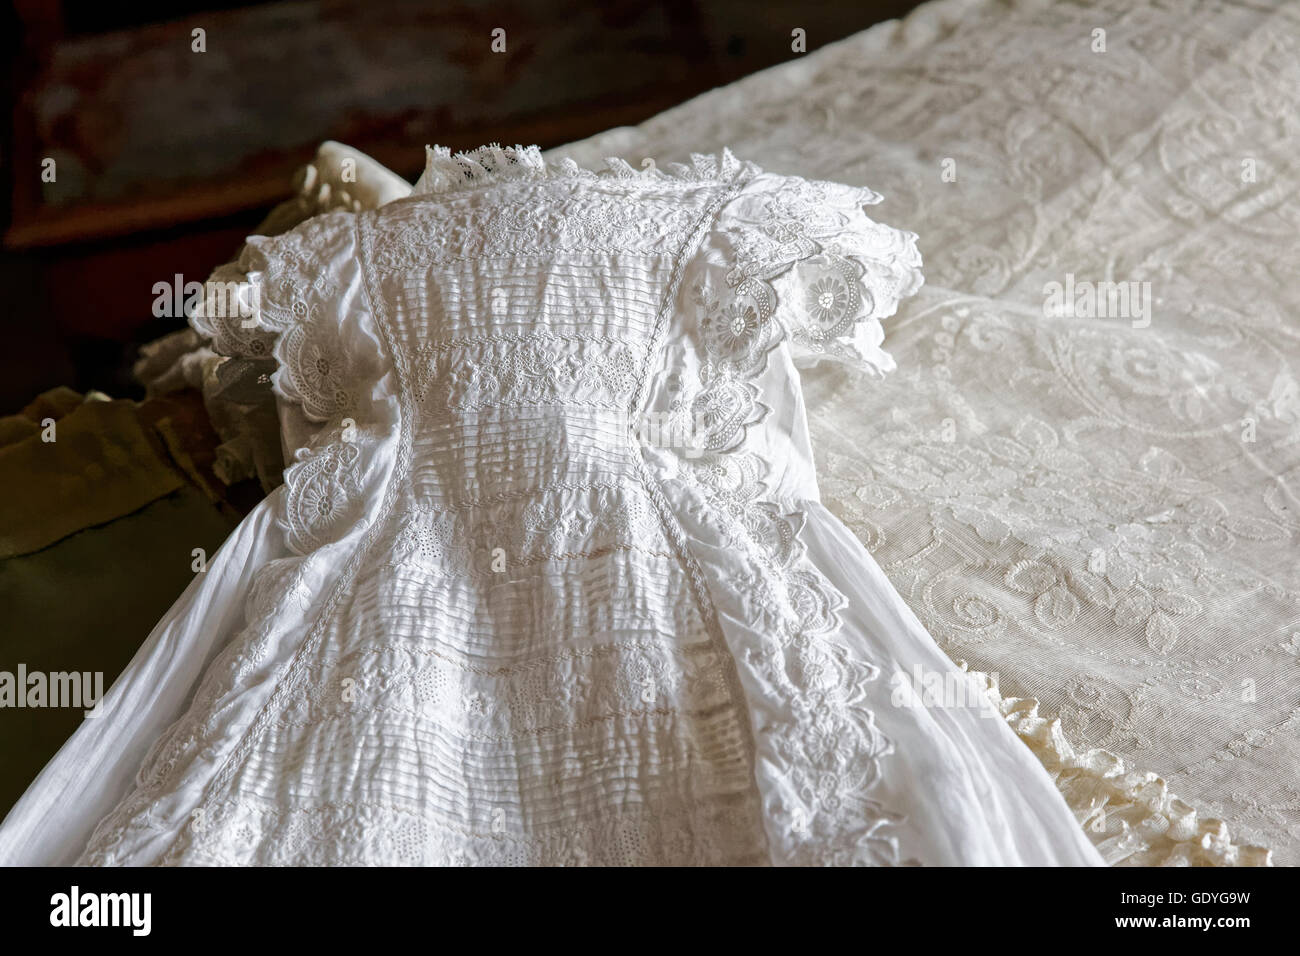 Antique lace Christening gown laid out on a bed Stock Photo